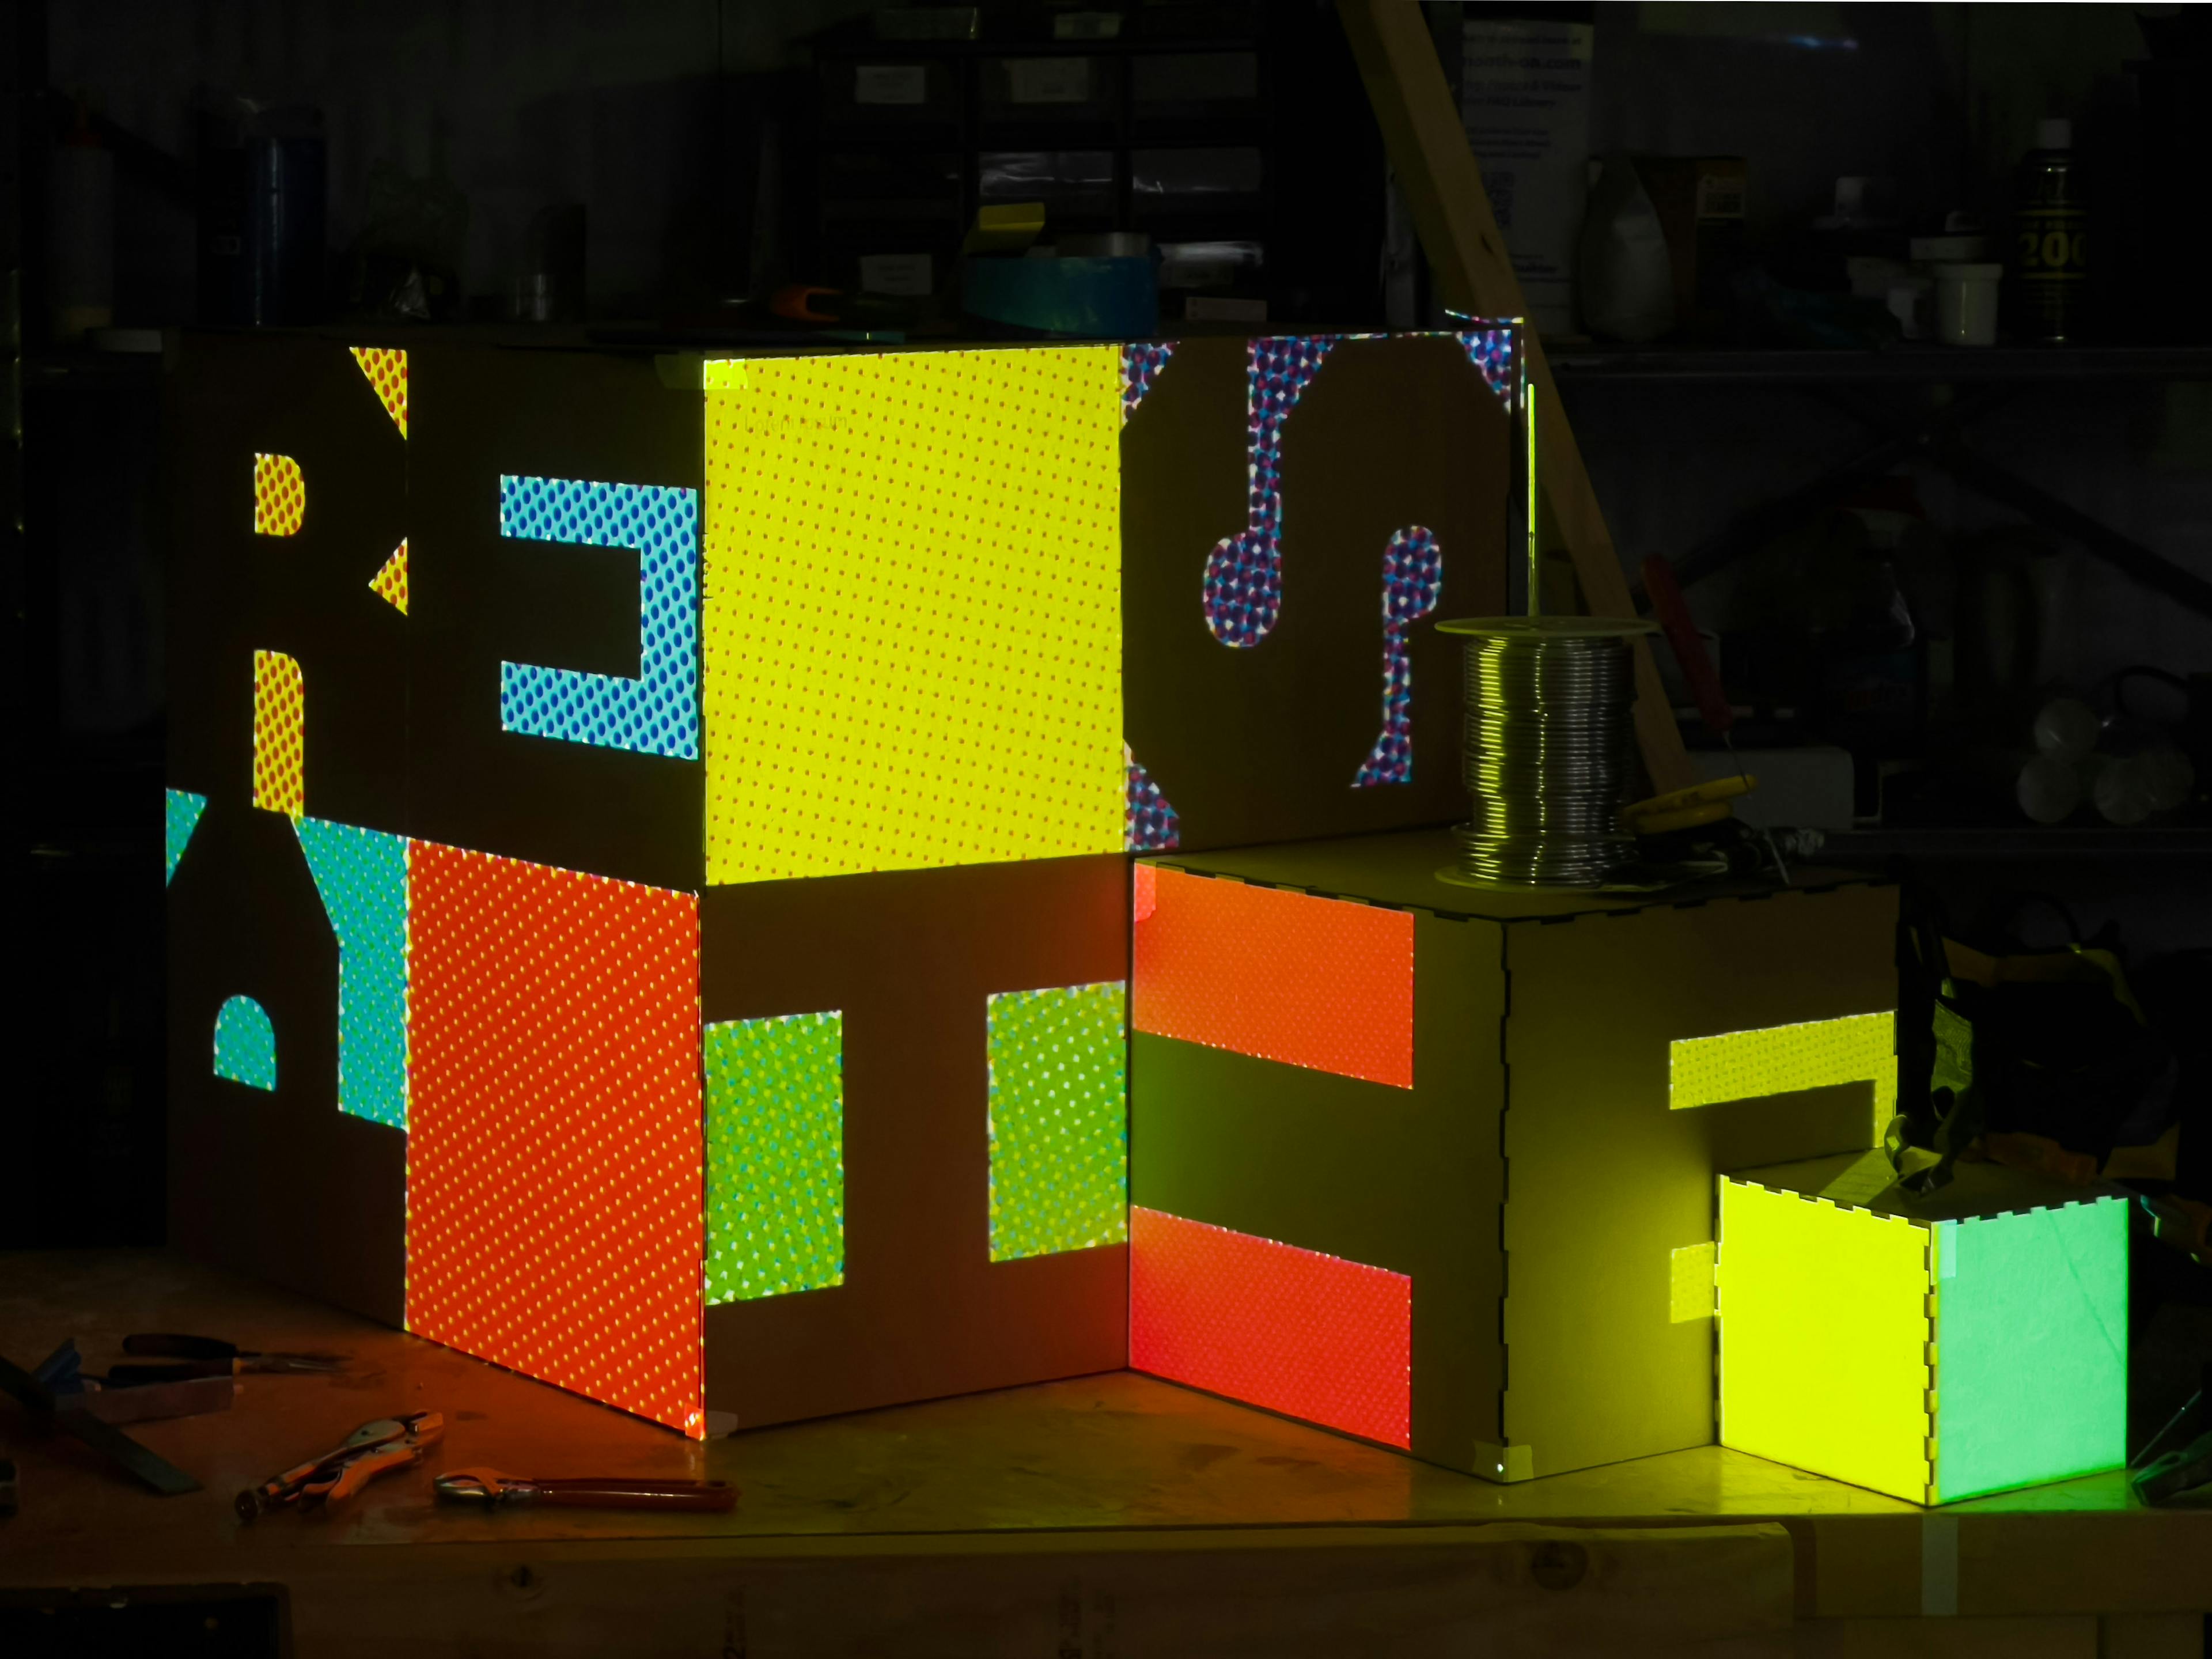 Colorful text that reads respite projected onto the three cardboard cubes